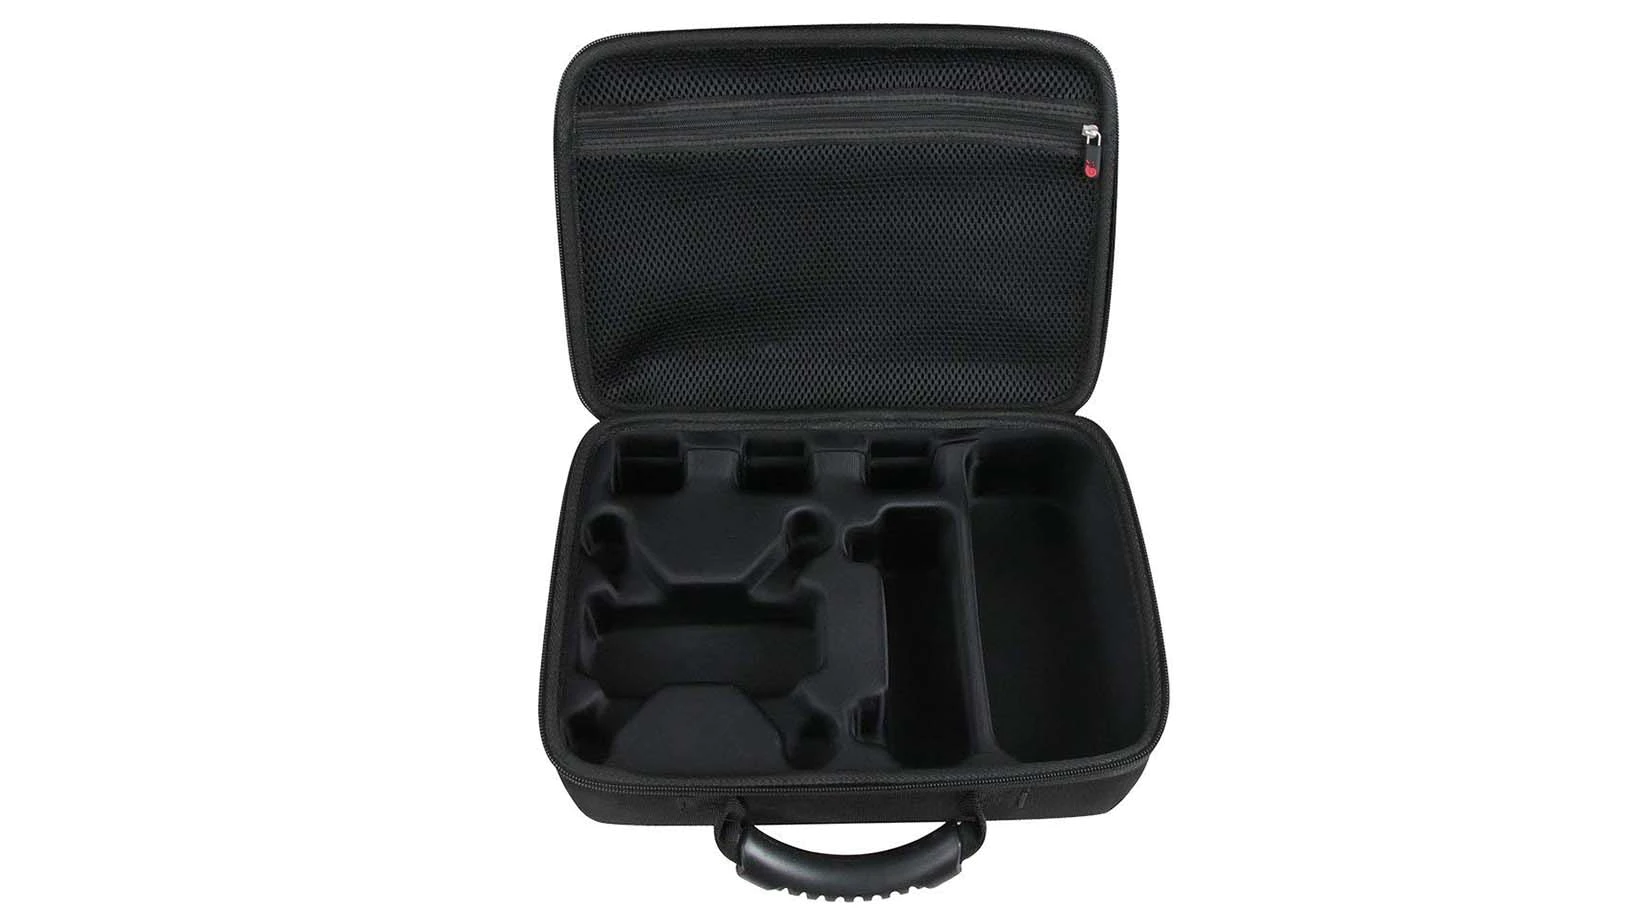 Prosperity carrying case company for brushes